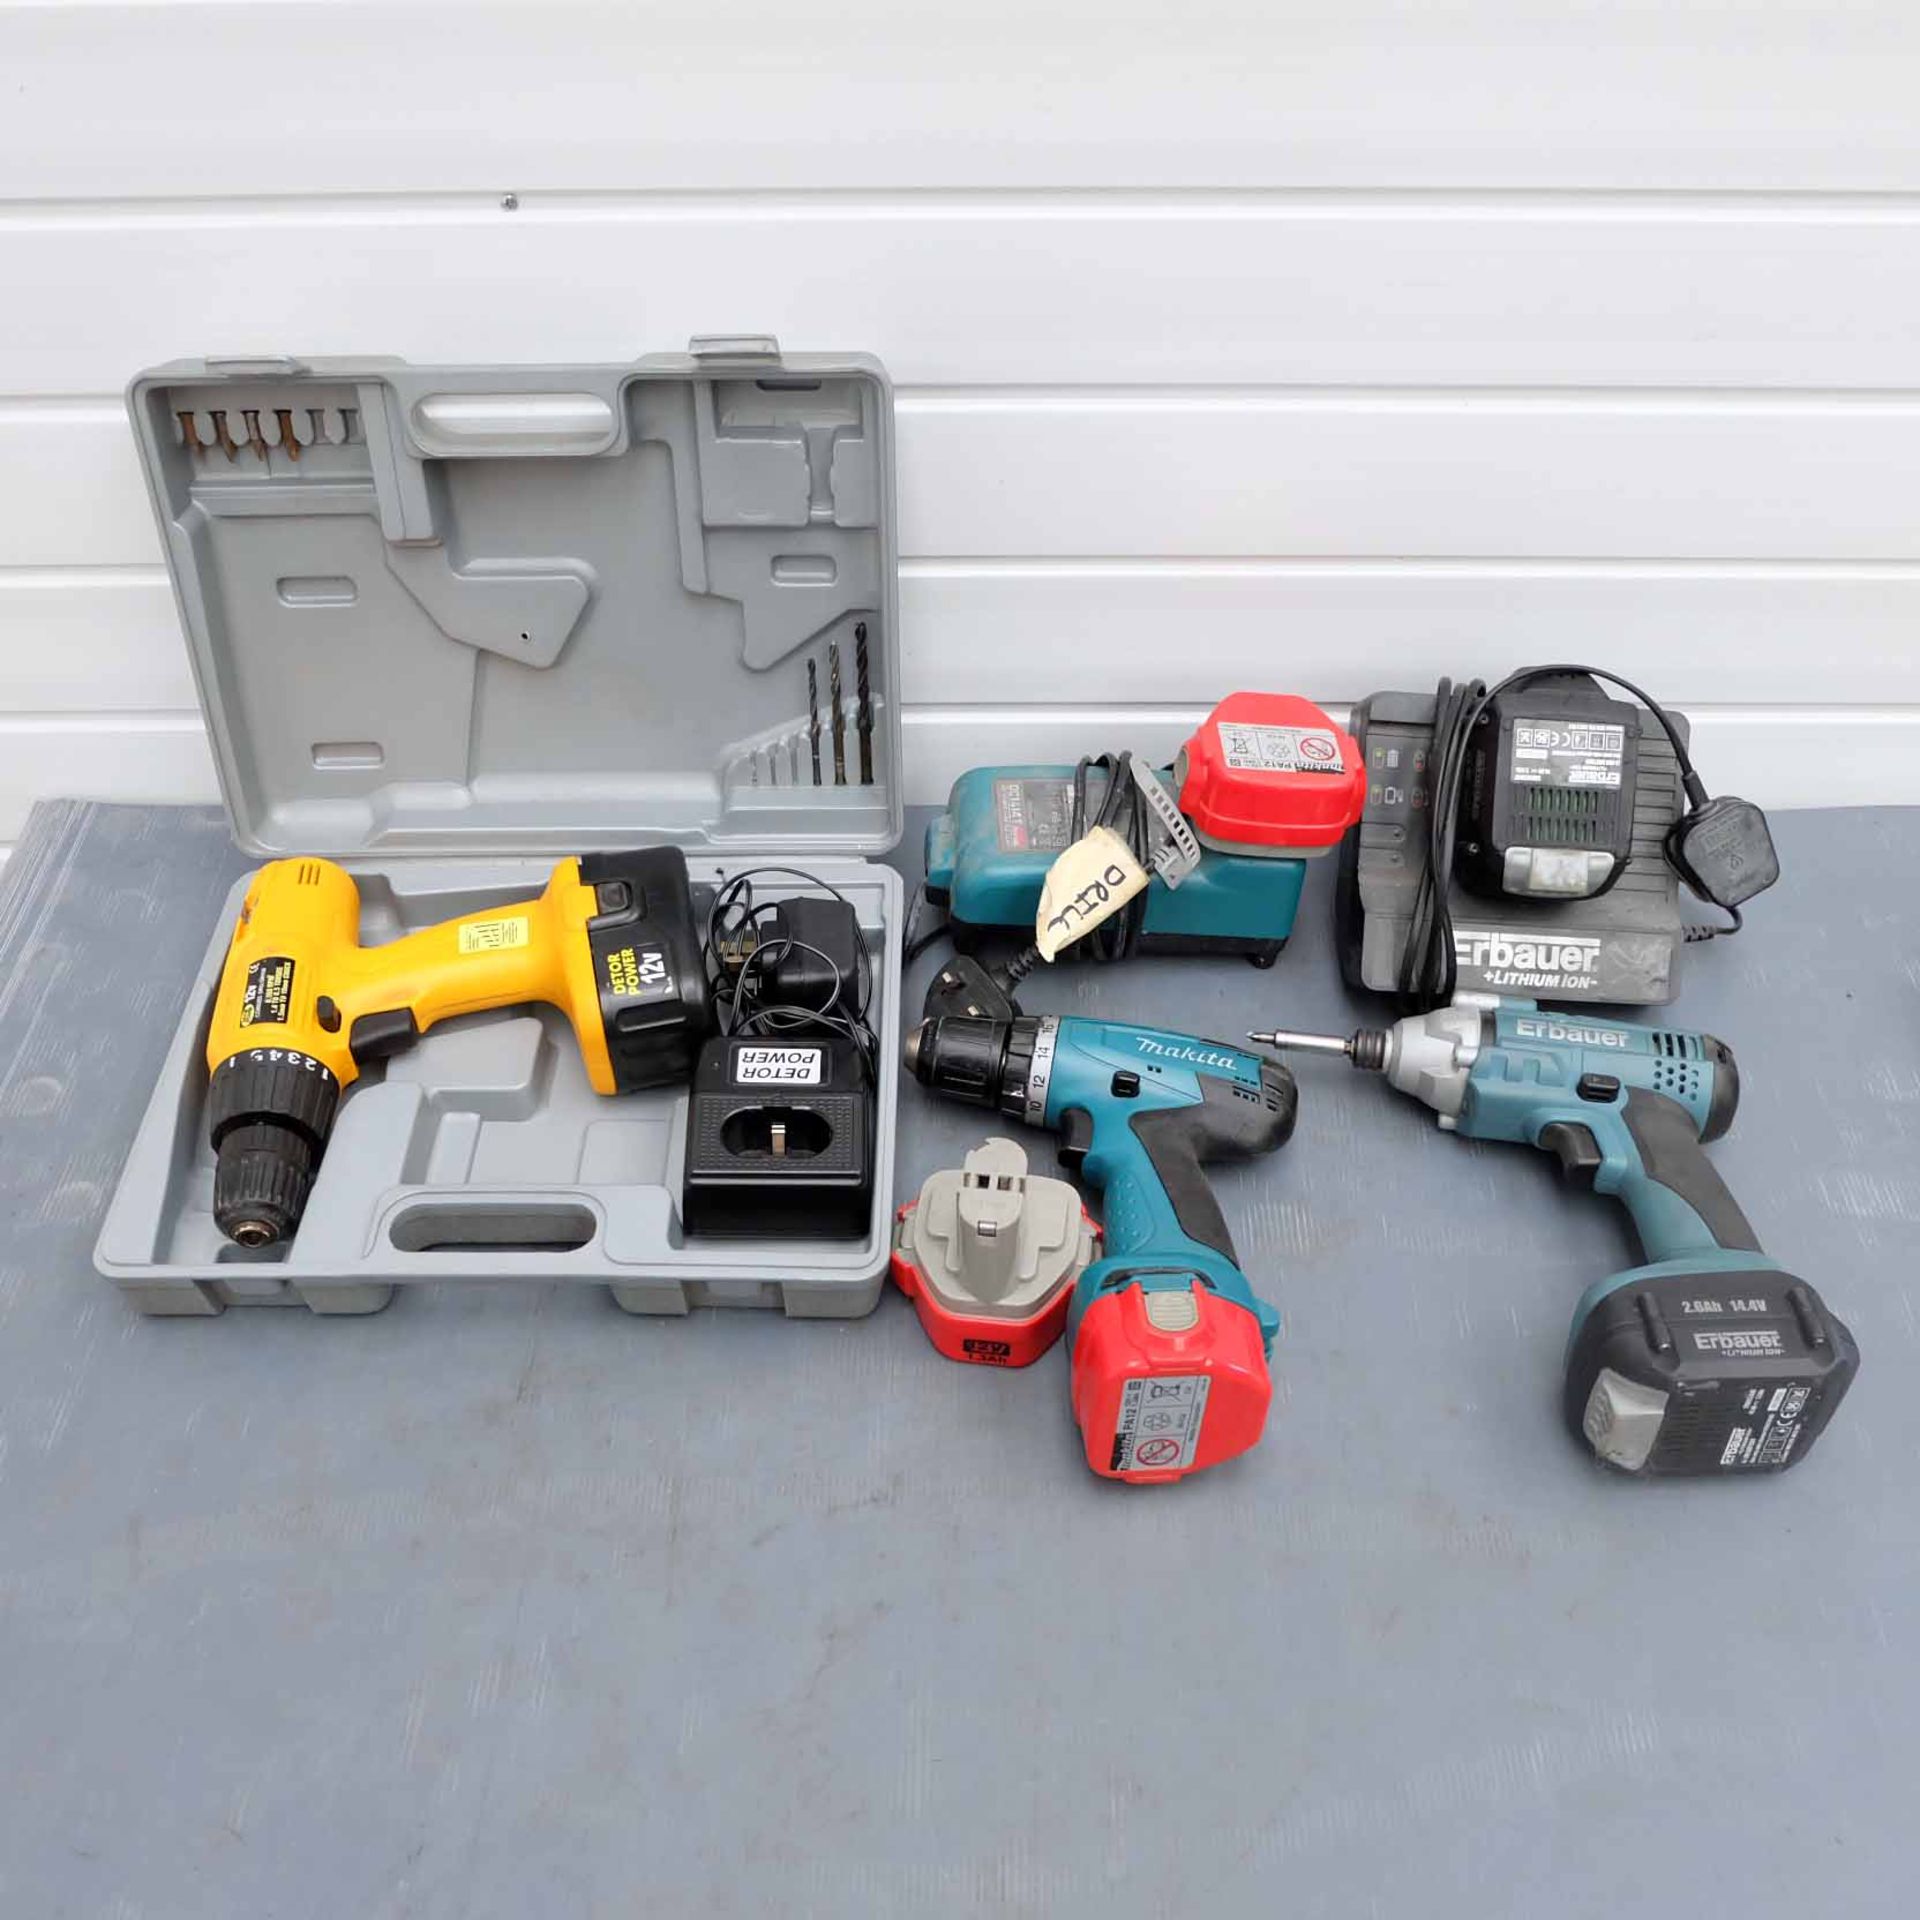 Quantity of 3 Drills. Includes Erbauer Drill With Charger & 2 Batteries (Working). Makita Drill With